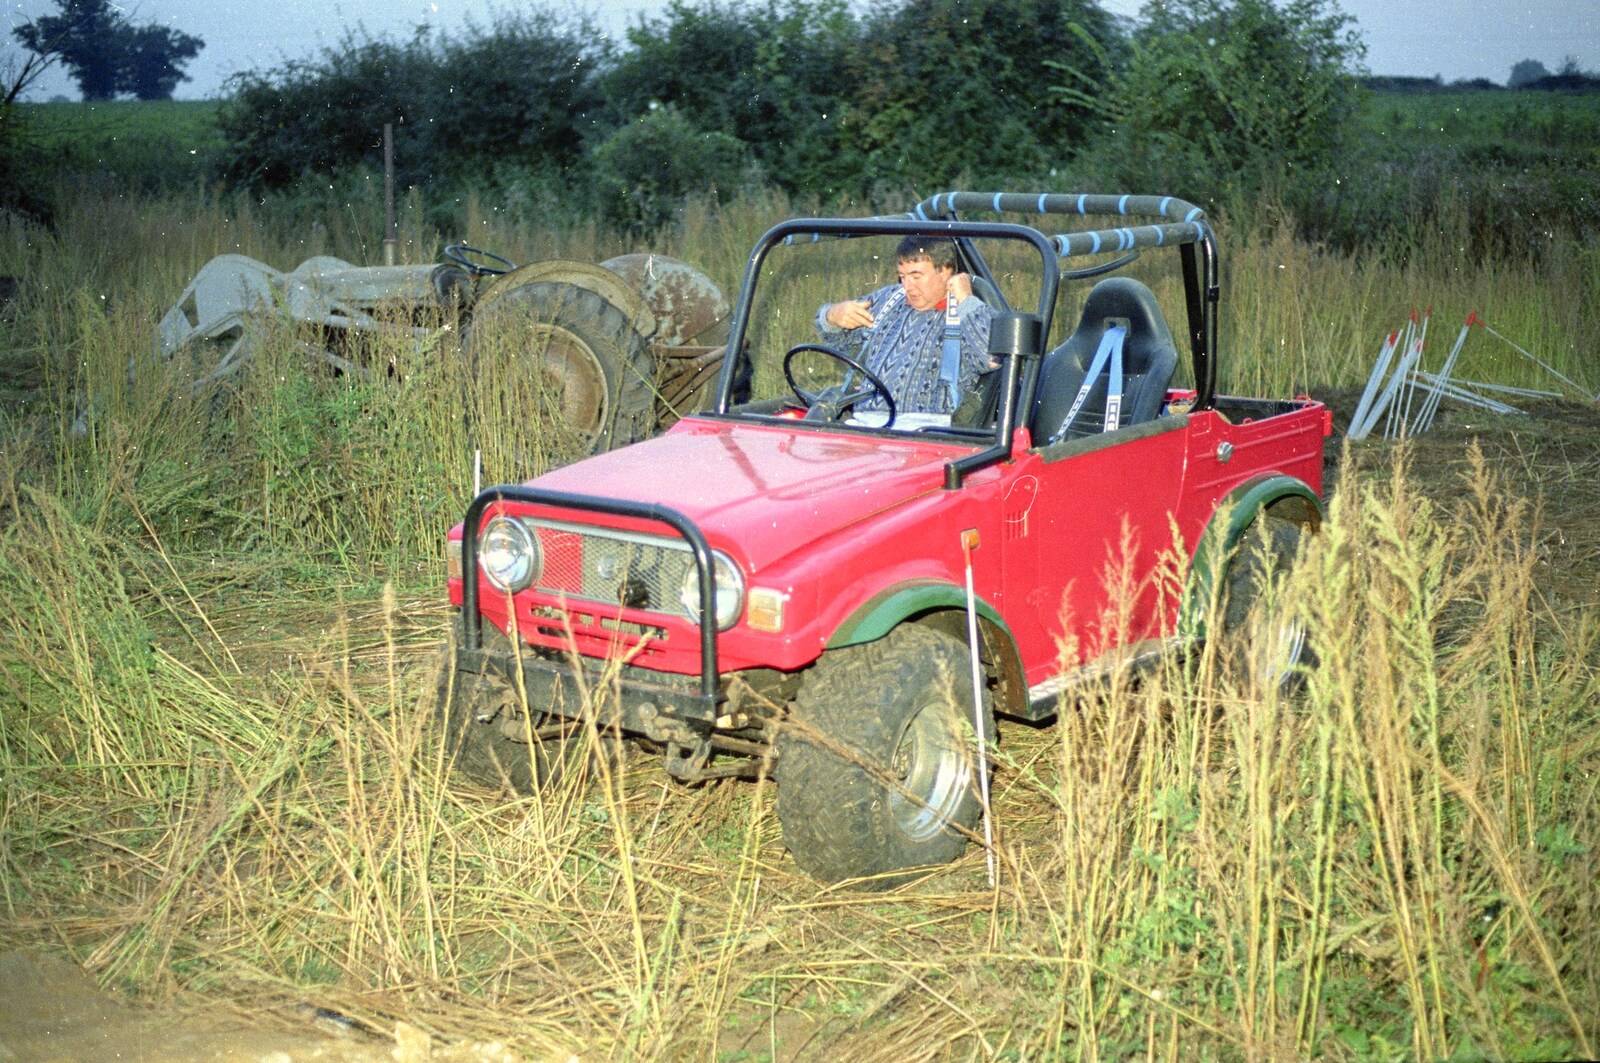 David straps in from Off-roading with Geoff and Brenda, Stuston and Elsewhere, Suffolk - 15th September 1995